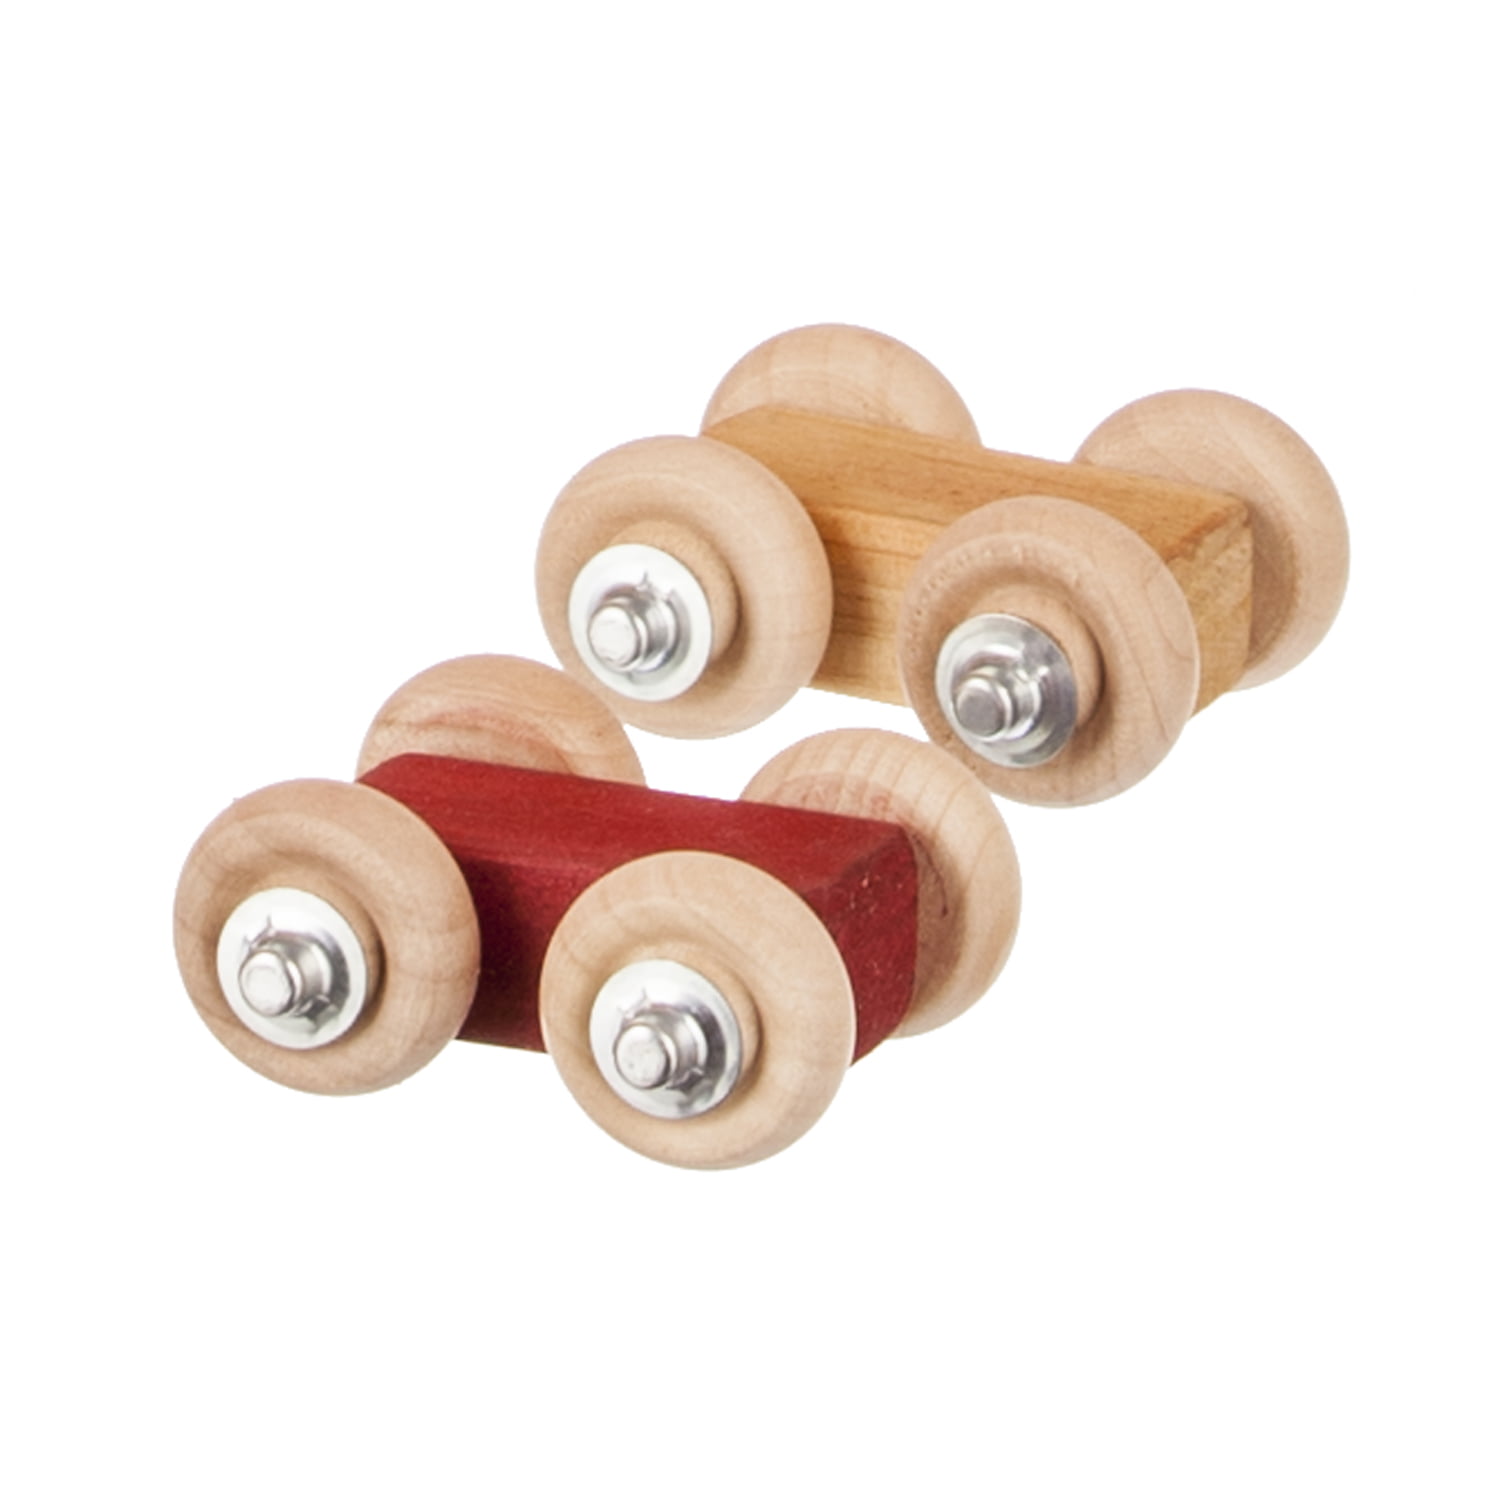 Retro Toys – Children’s Wooden Set Of 4 Cars for Toy Car Roller